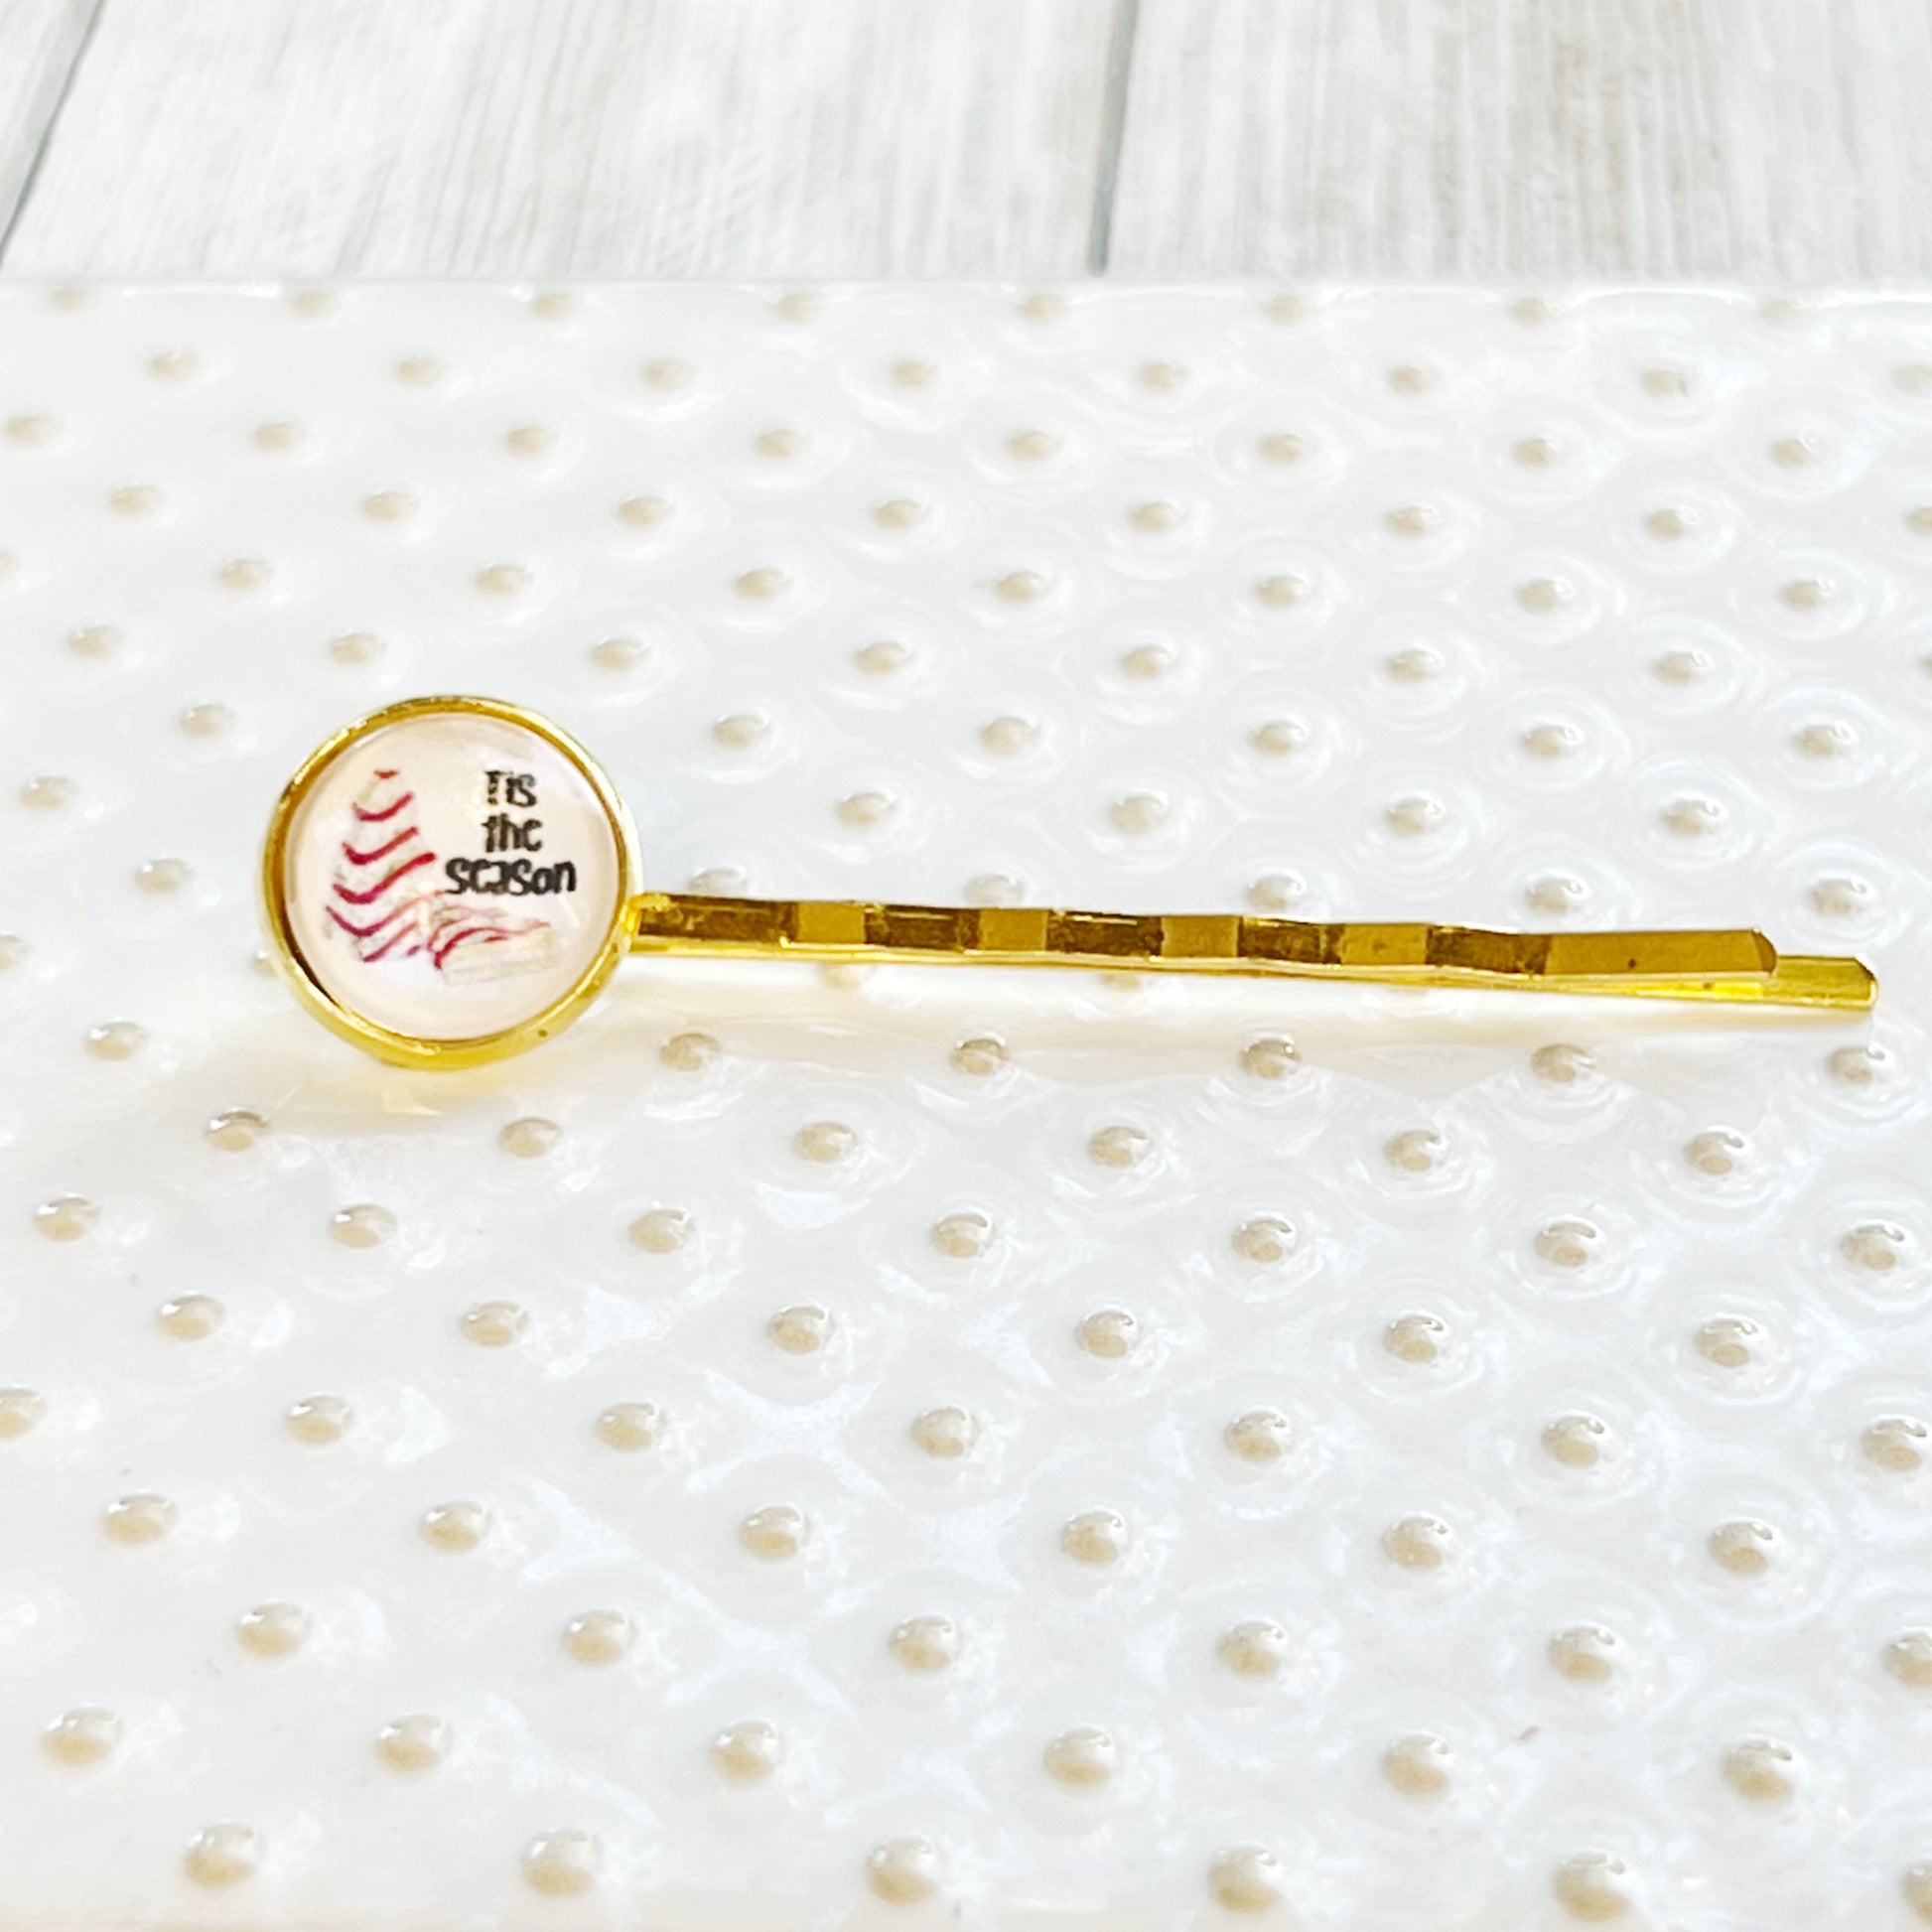 Christmas Tree Cake Gold Hair Pin - Festive Accessory for Holiday Hairstyles